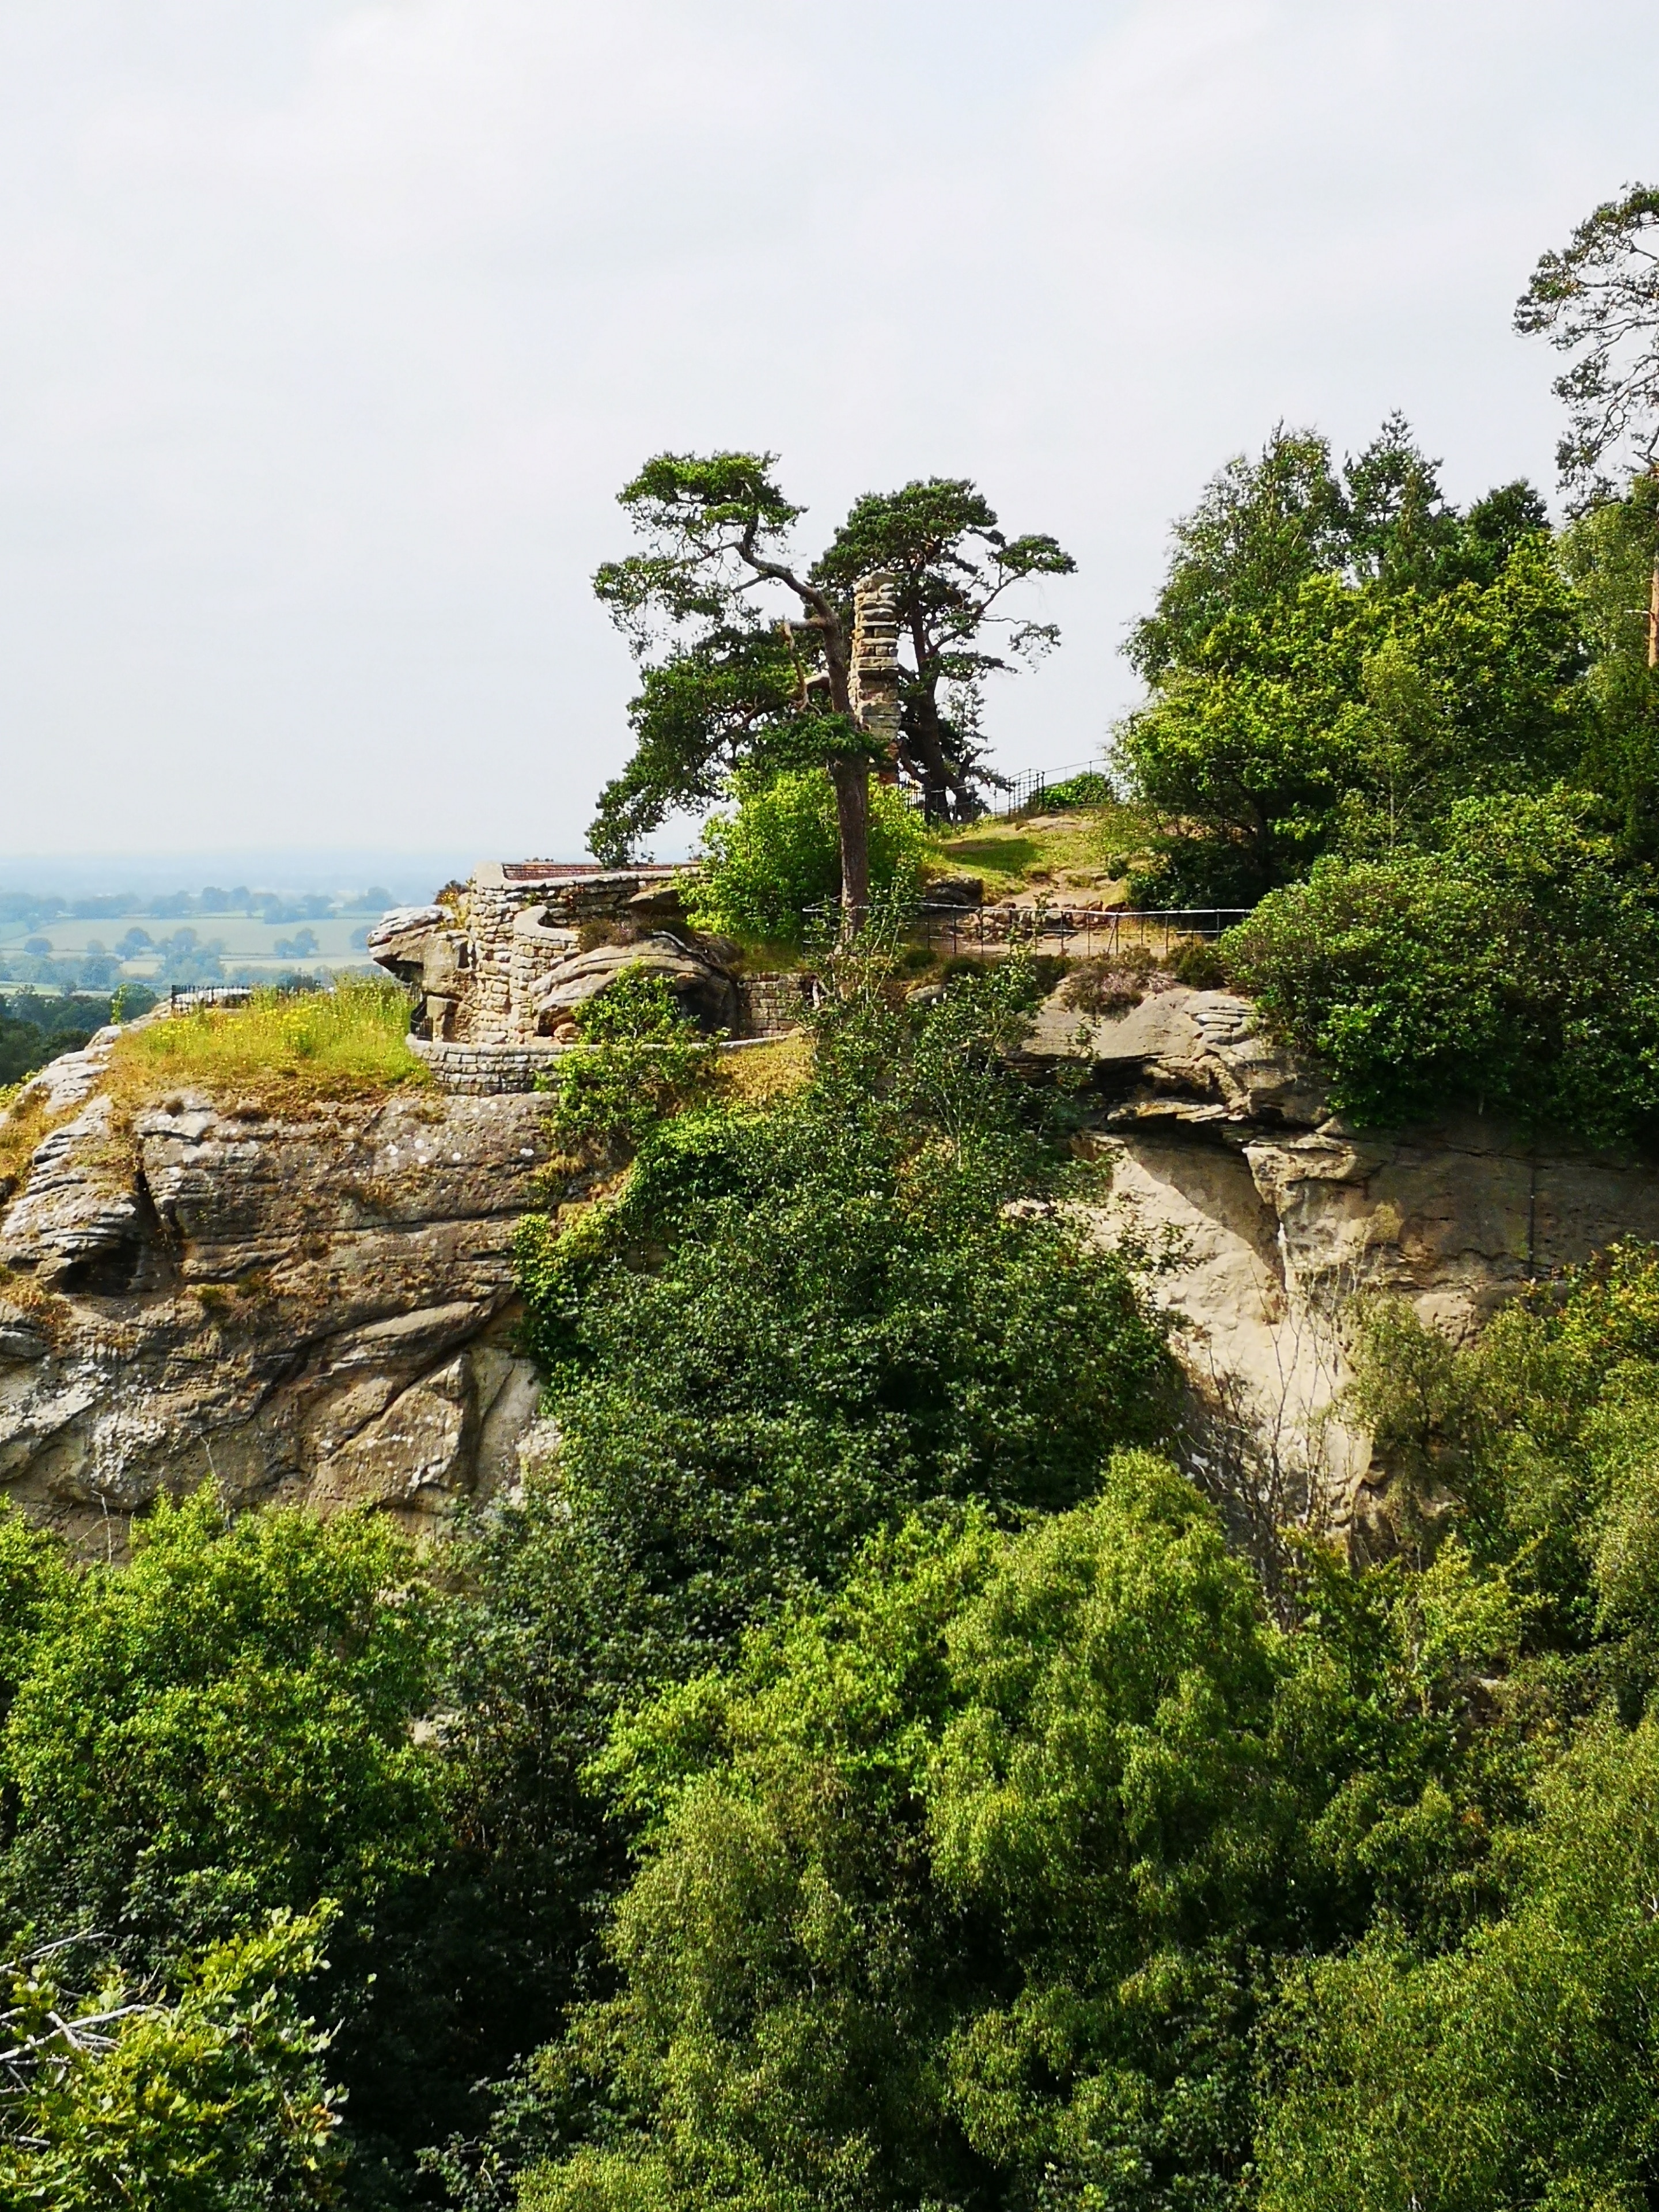 An interesting country park full of follies, caves, grottos and rock formations.